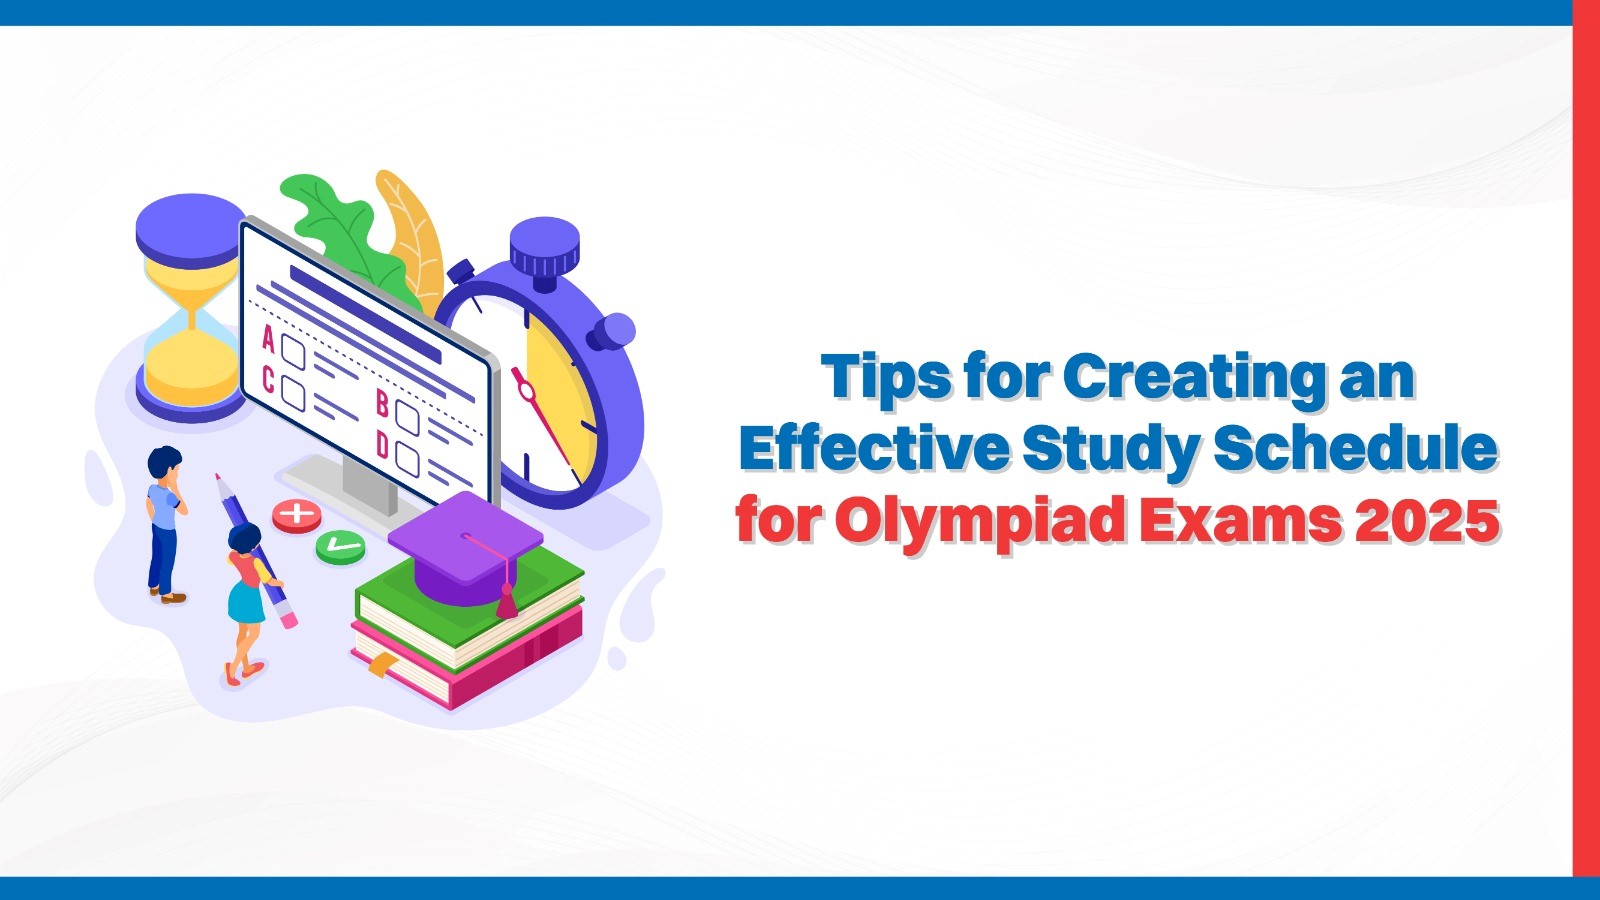 Tips for Creating an Effective Study Schedule for Olympiad Exams 2025.jpg